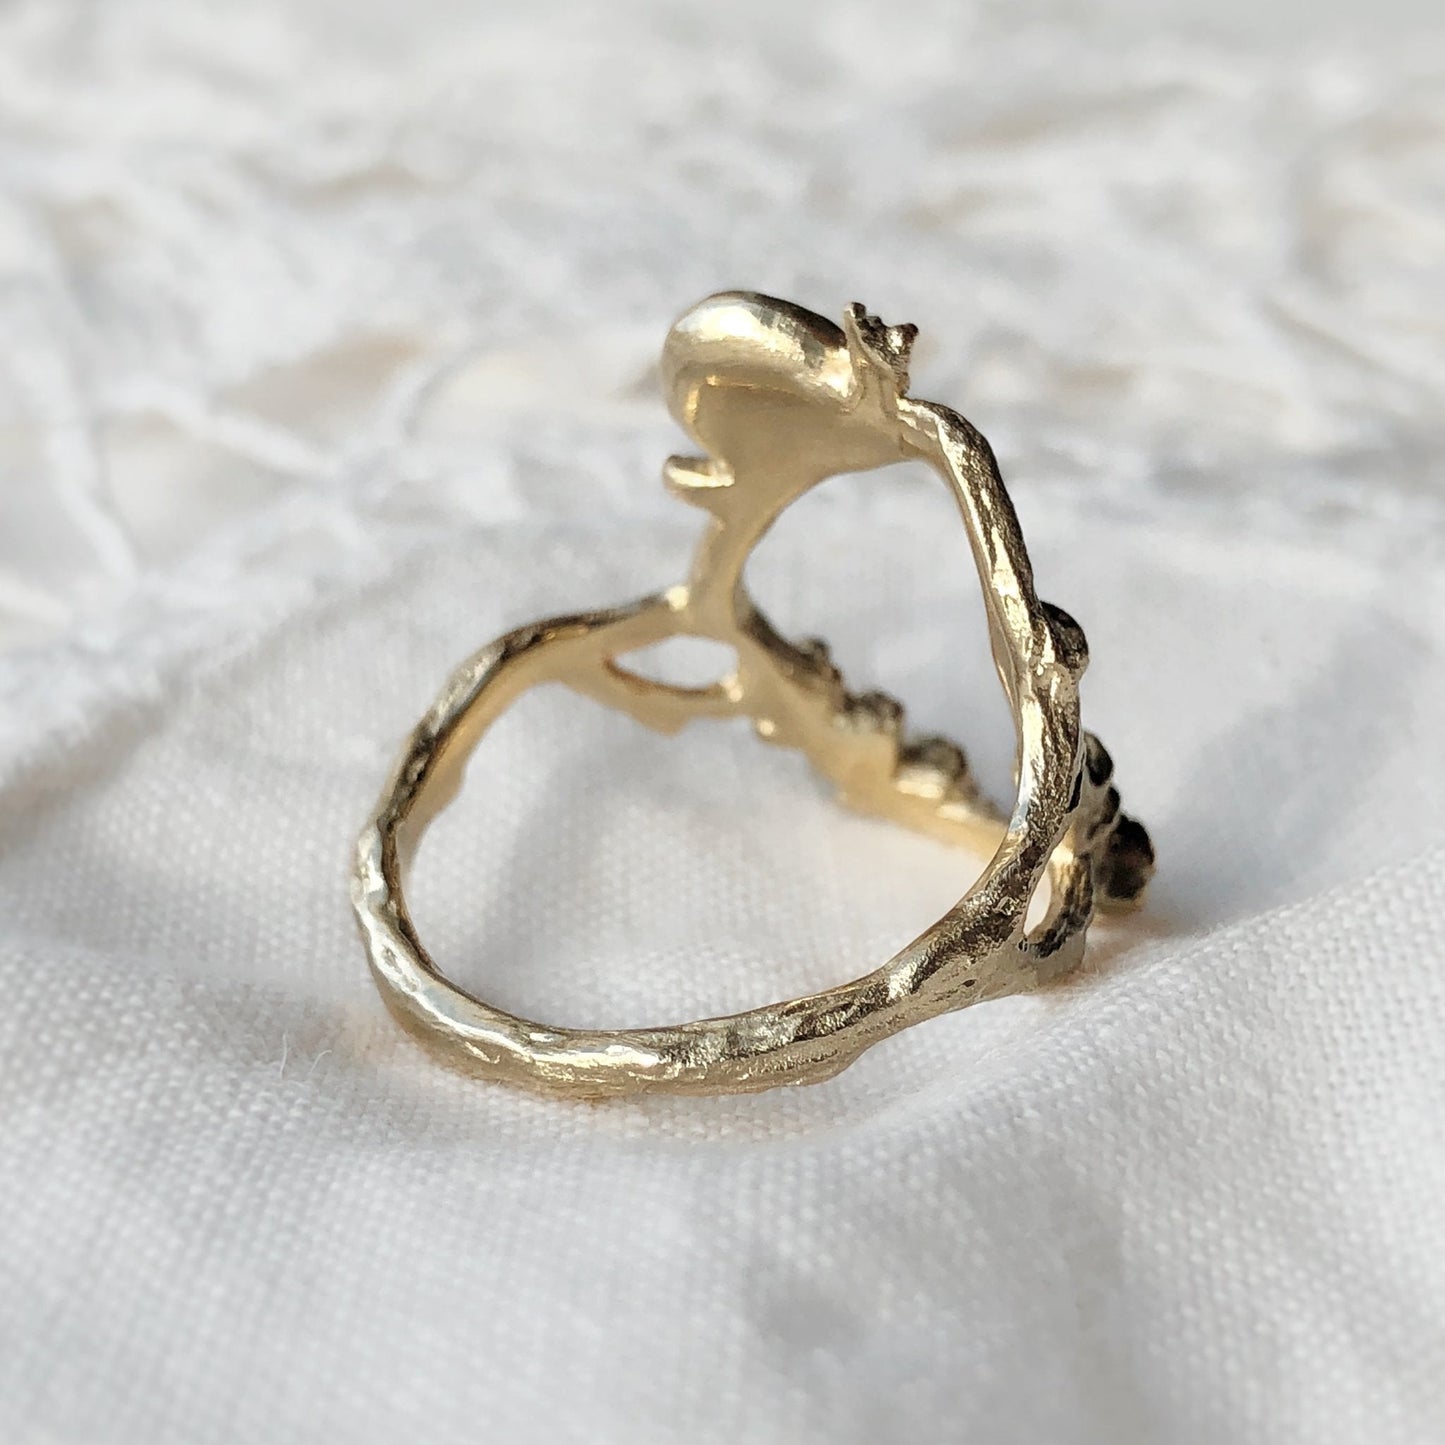 Snail and Mushrooms Ring - 9K Gold - Made to Order